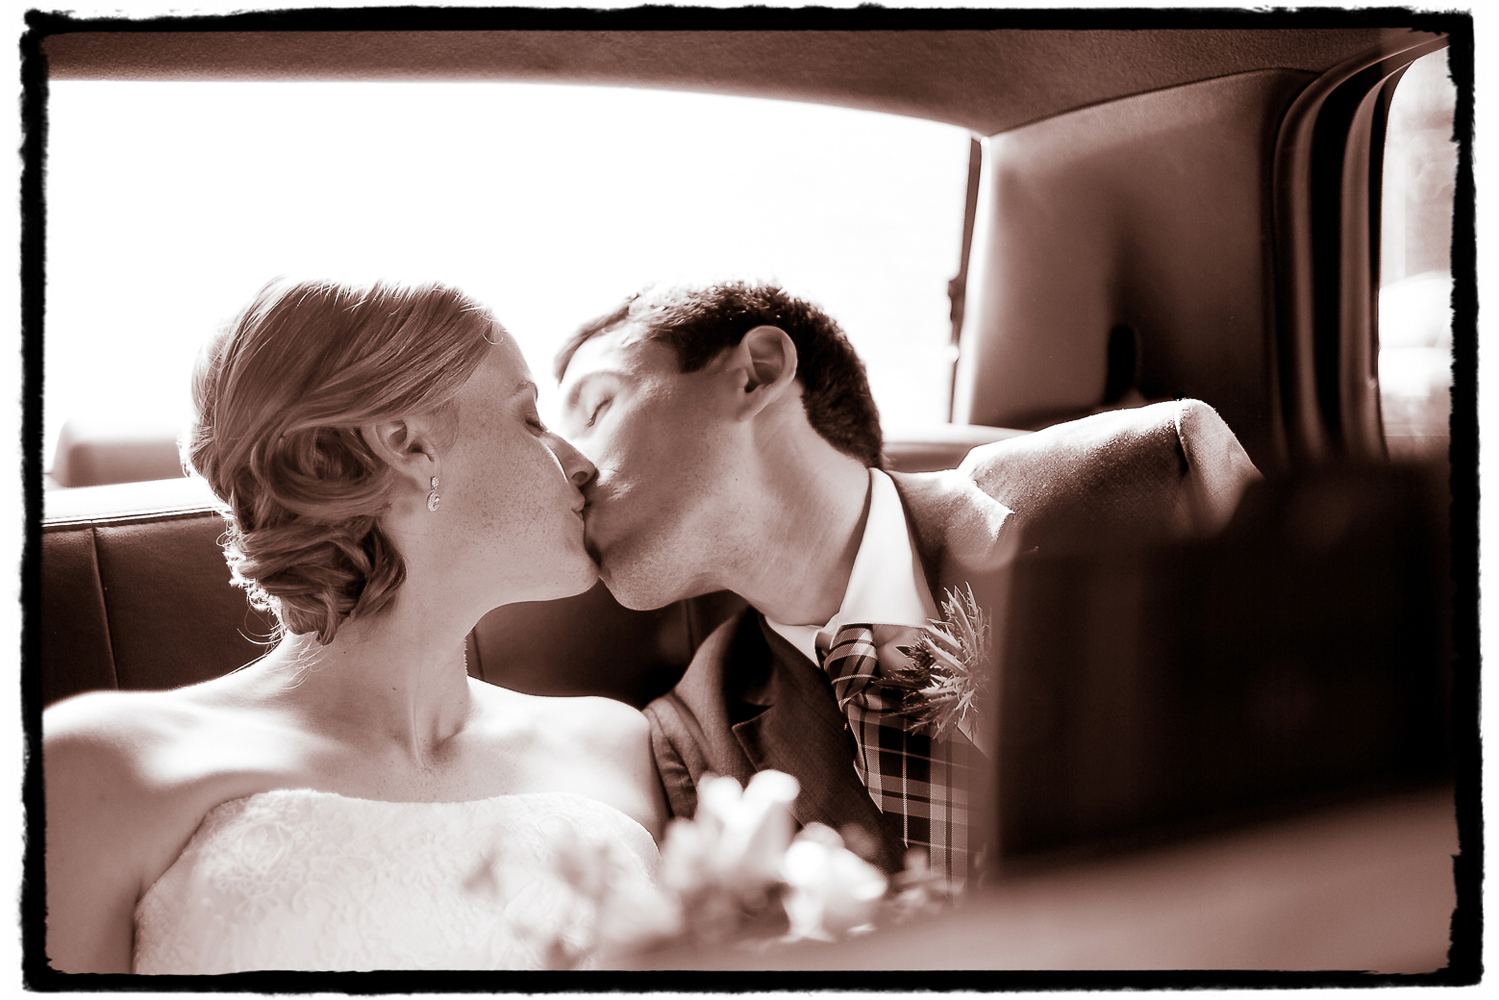 Seth and Jennifer sharing a moment in the back of our cab en route to Housing Works Bookstore in SoHo from the family and bridal party group shots we took by the Arch in Washington Square Park.